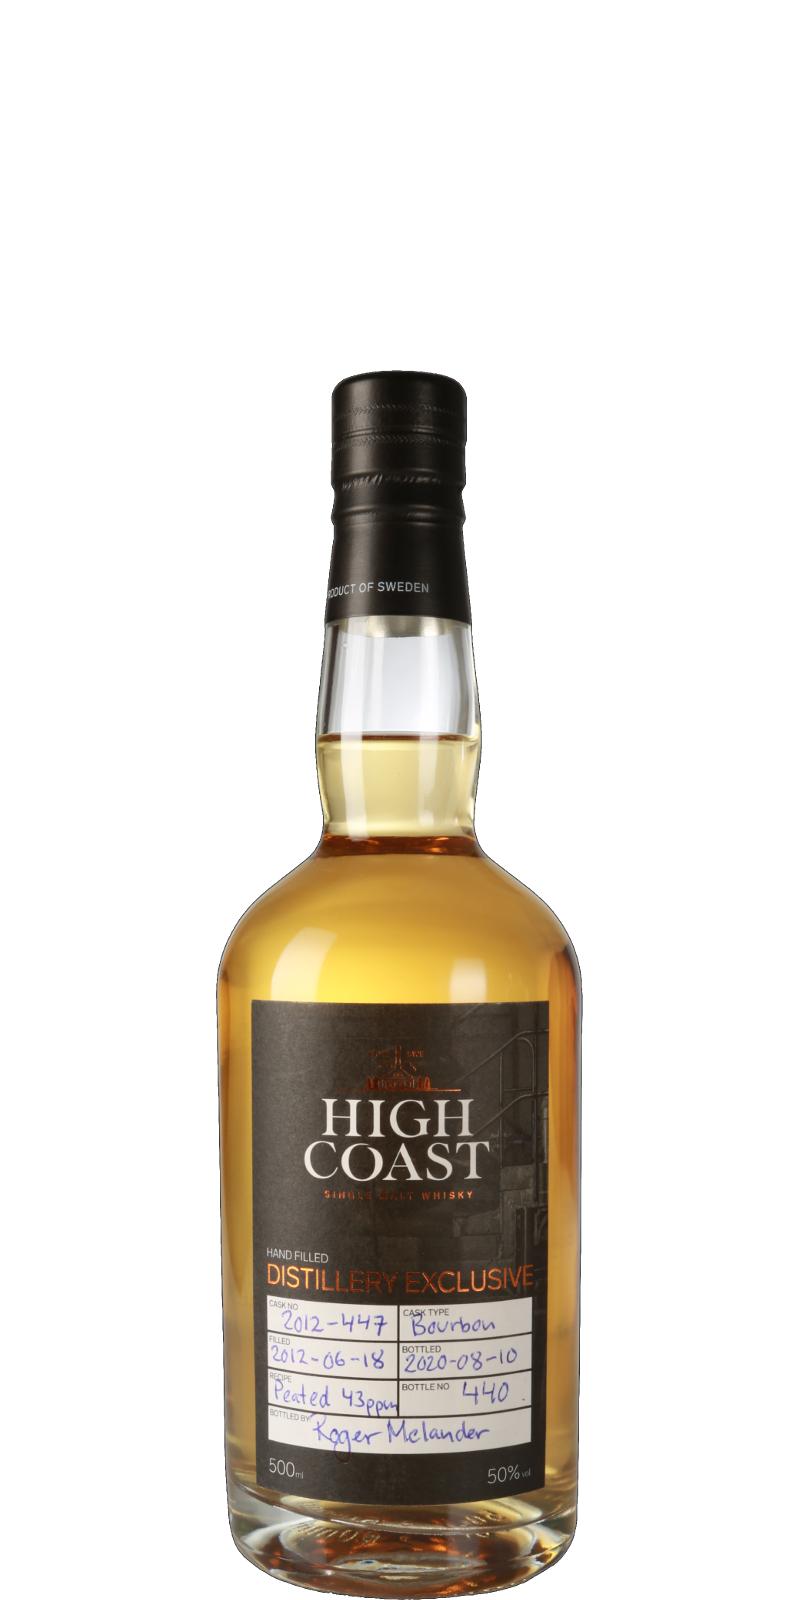 High Coast 2012 Distillery Exclusive Hand Filled Bourbon Peated 43 ppm 2012-447 50% 500ml